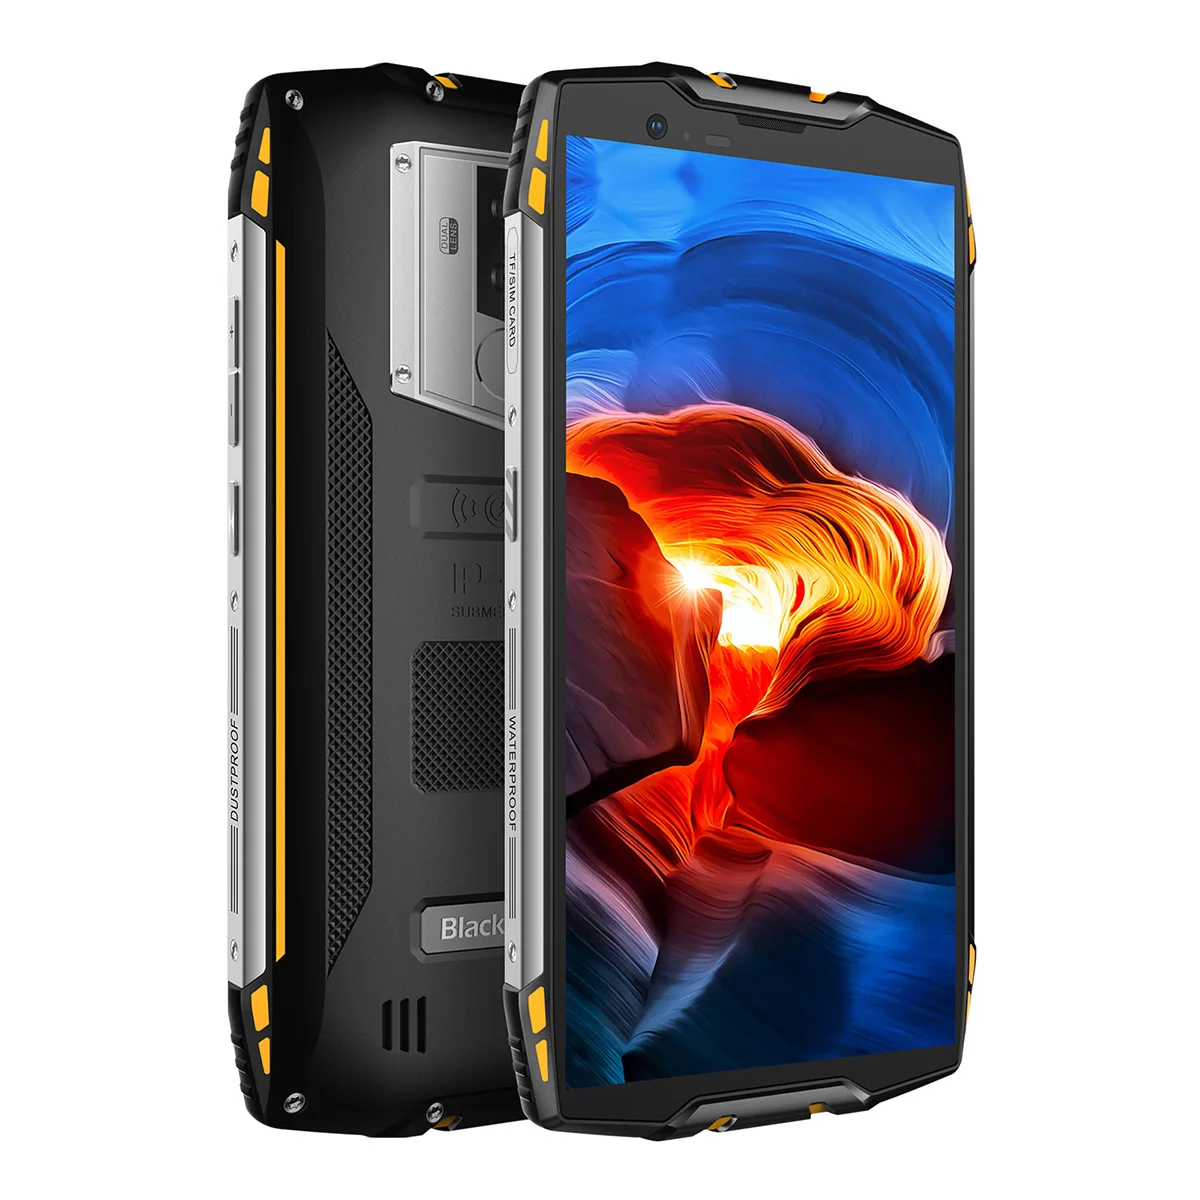 

BV6800 Pro Waterproof Smartphone 5.7" FHD MT6750T Octa Core 4GB+64GB 6580mAh Android 8.0 Wireless charge Mobile Phone, Black, green, gold